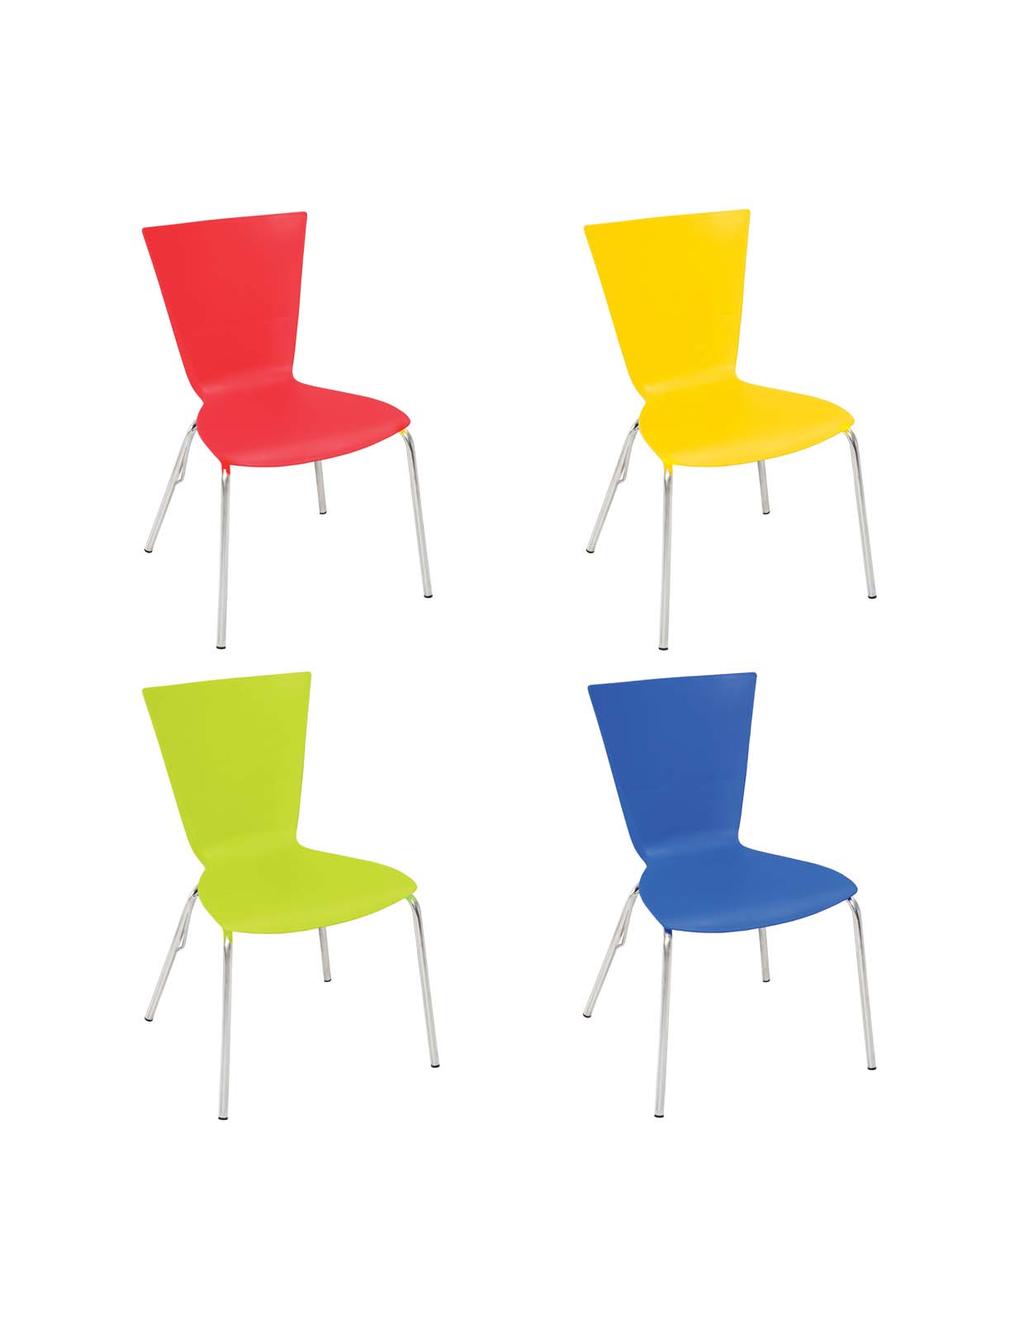 VIENNA RED YELLOW FLUORESCENT GREEN BLUE VIENNA is a stackable chair with seat moulded in tough virgin polymers and legs of stainless steel.